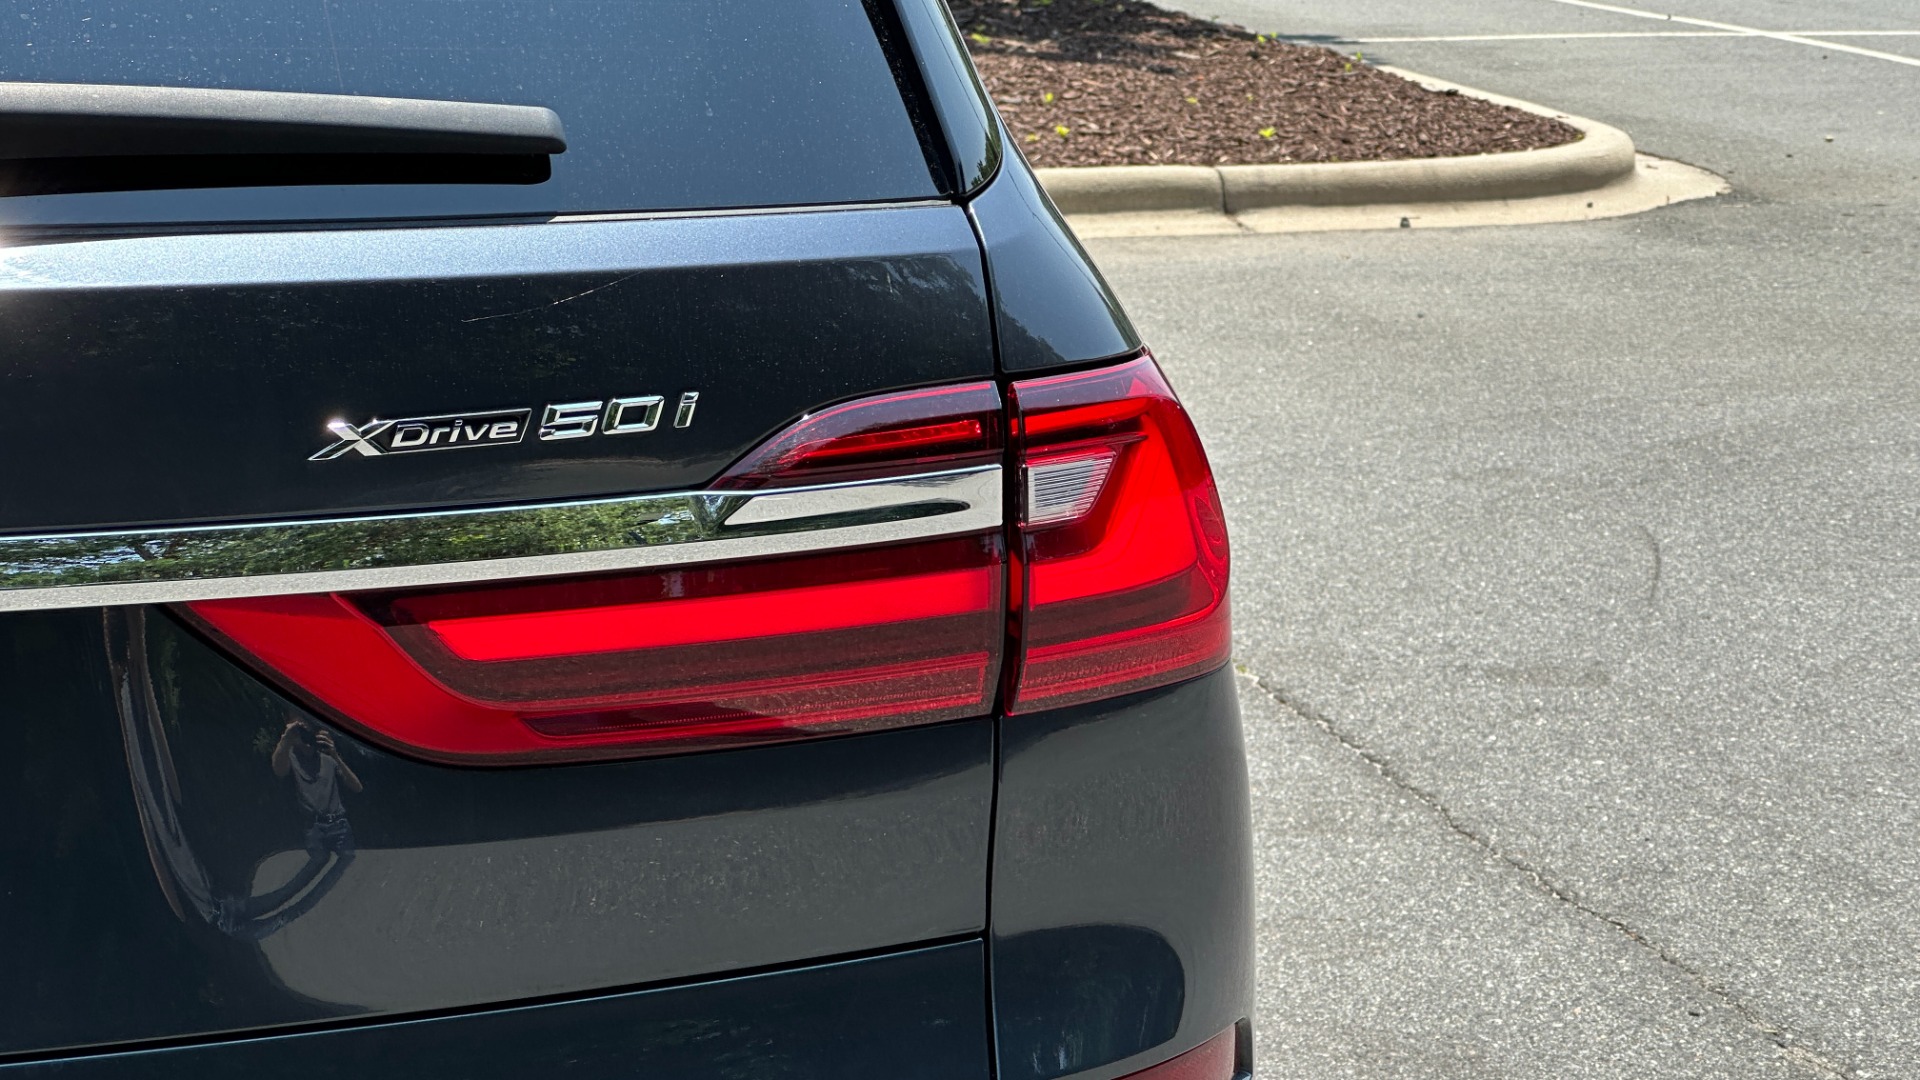 Used 2019 BMW X7 xDrive50i / EXECUTIVE / M SPORT / EXECUTIVE / DYNAMIC HANDLING / LEATHER for sale $53,800 at Formula Imports in Charlotte NC 28227 52